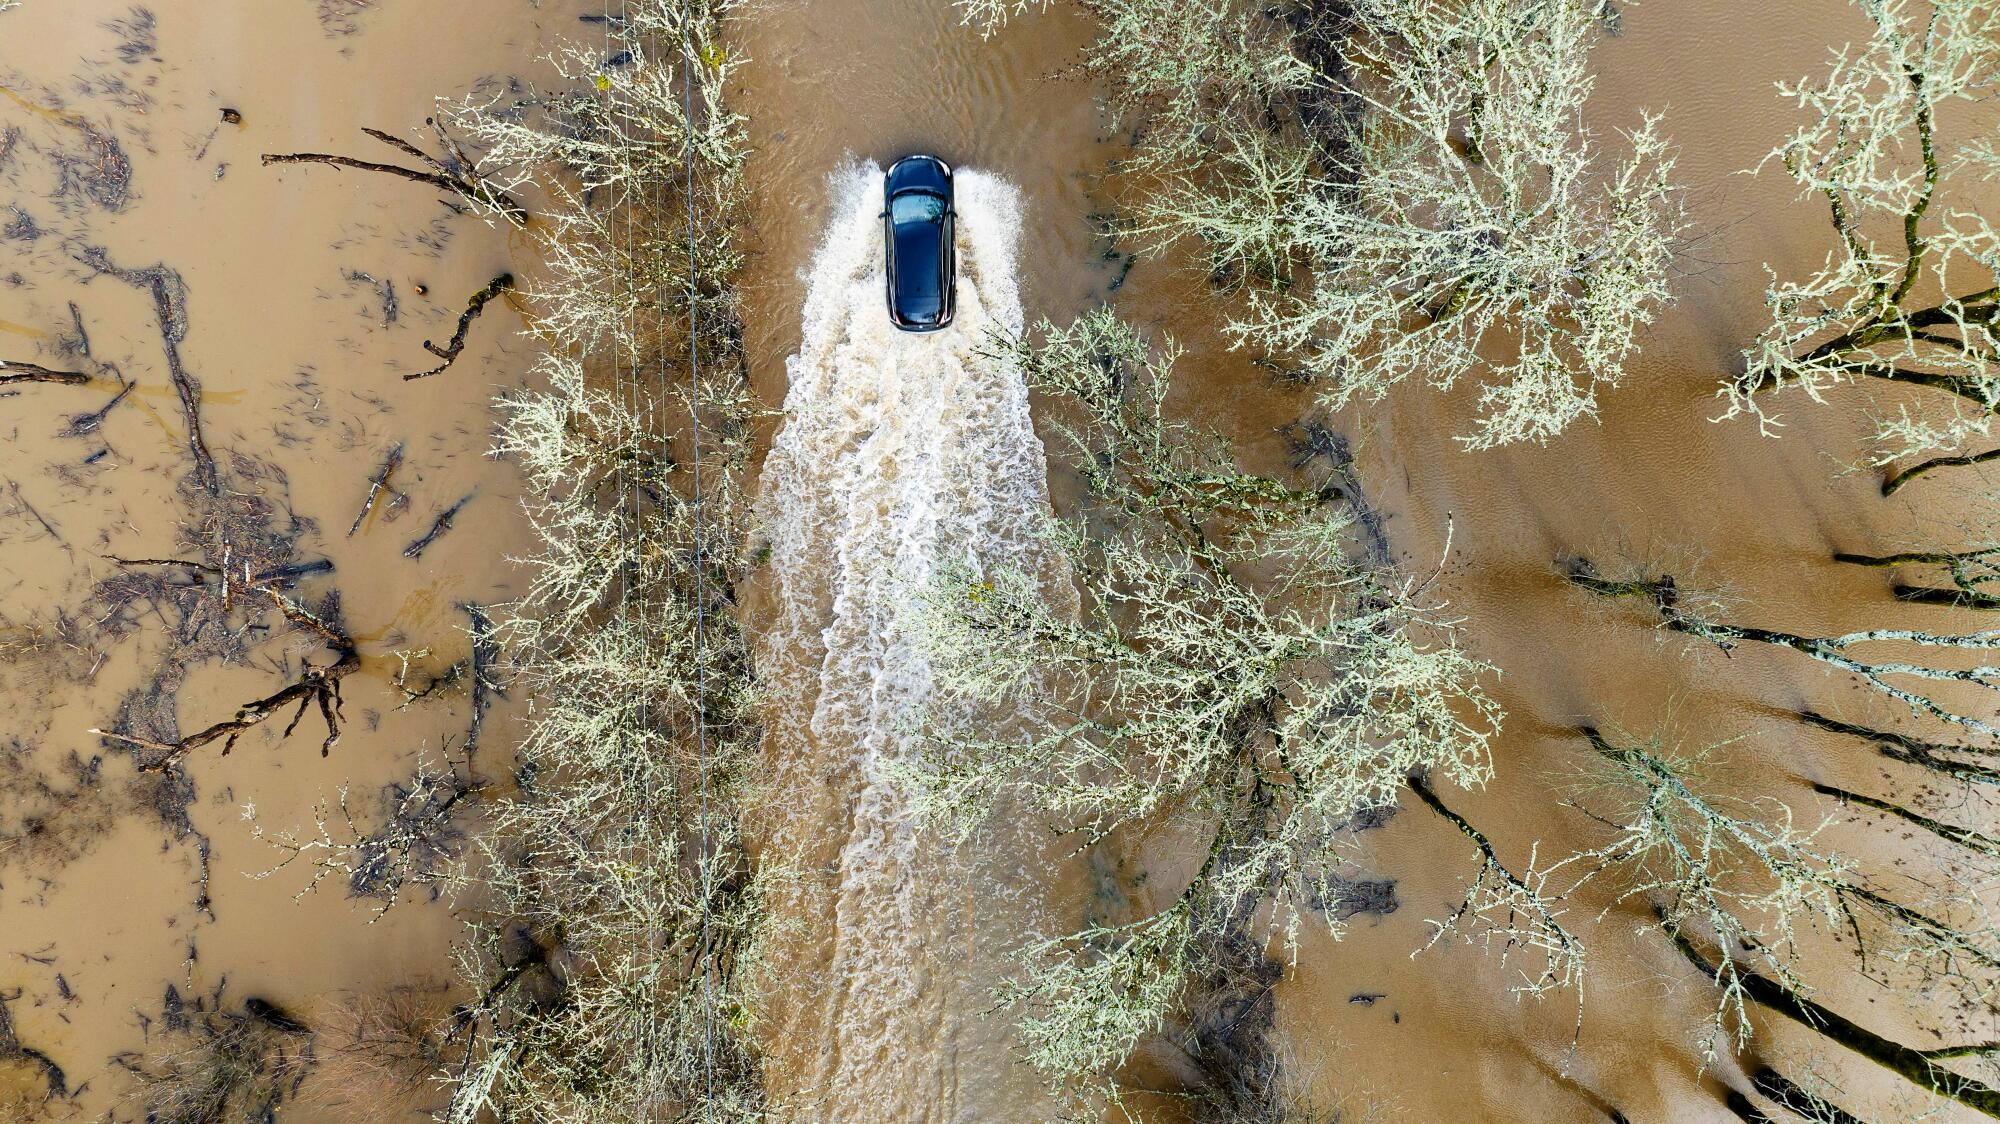 A vehicle drives through muddy waters on a flooded road surrounding by fields and forest.